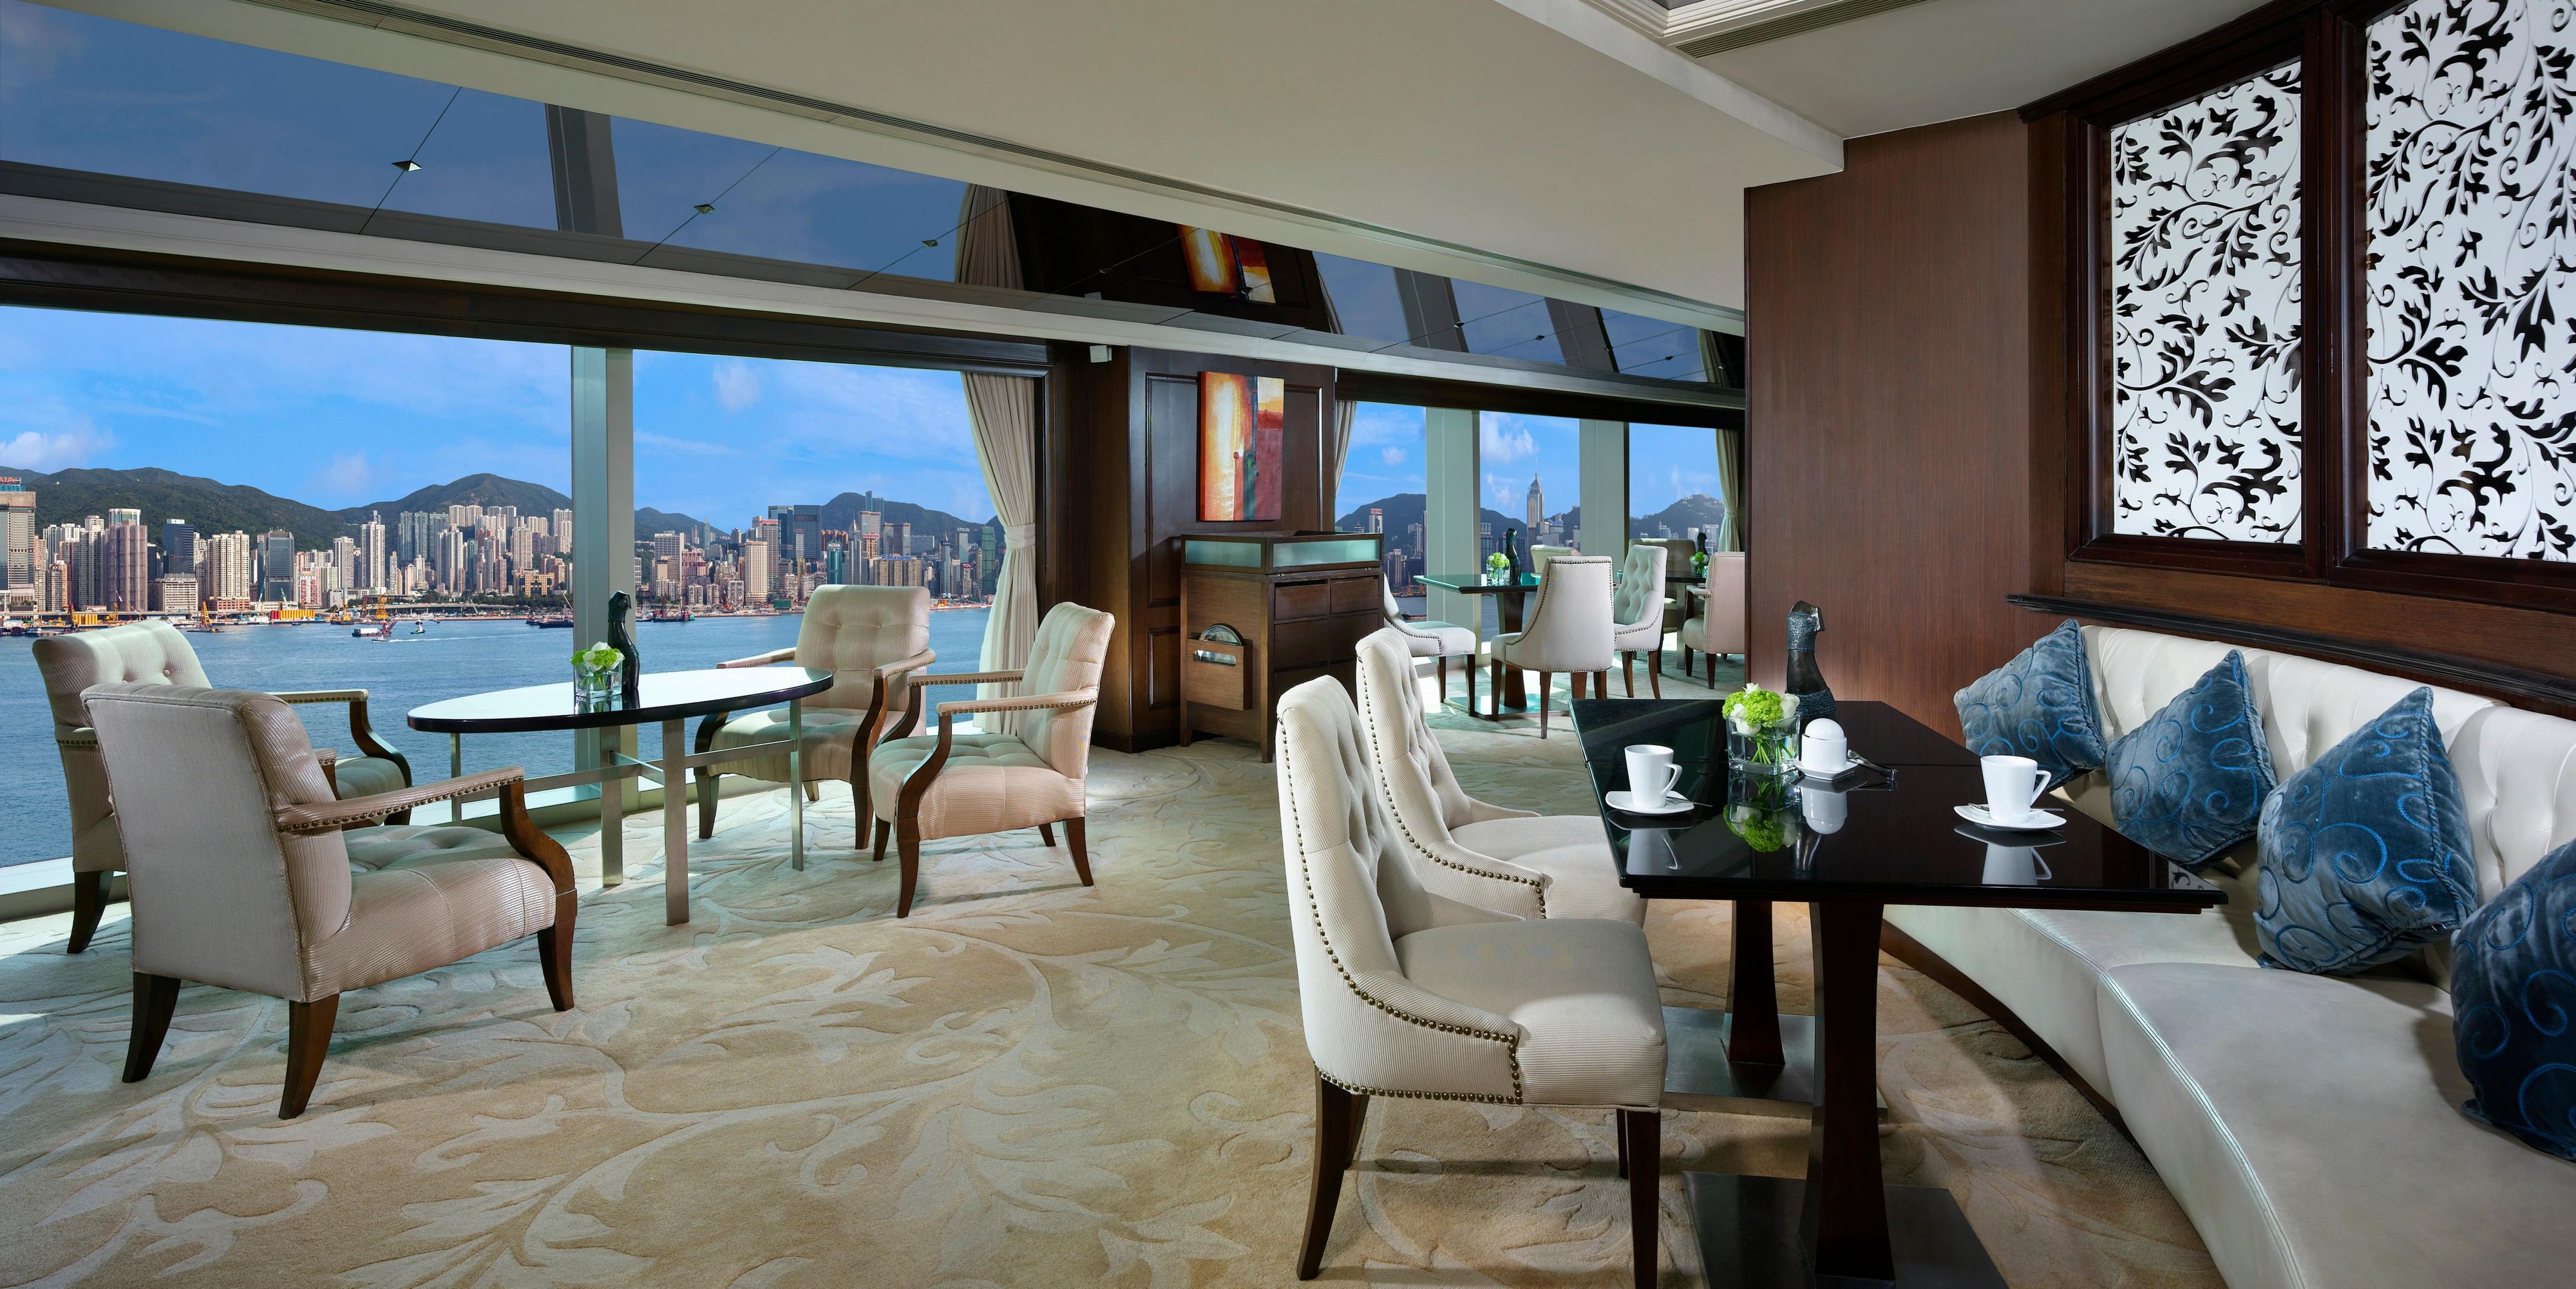 Located on the first floor with stunning views of Victoria Harbour and Hong Kong skyline, the Club Lounge serves buffet breakfast, afternoon tea and evening cocktails.